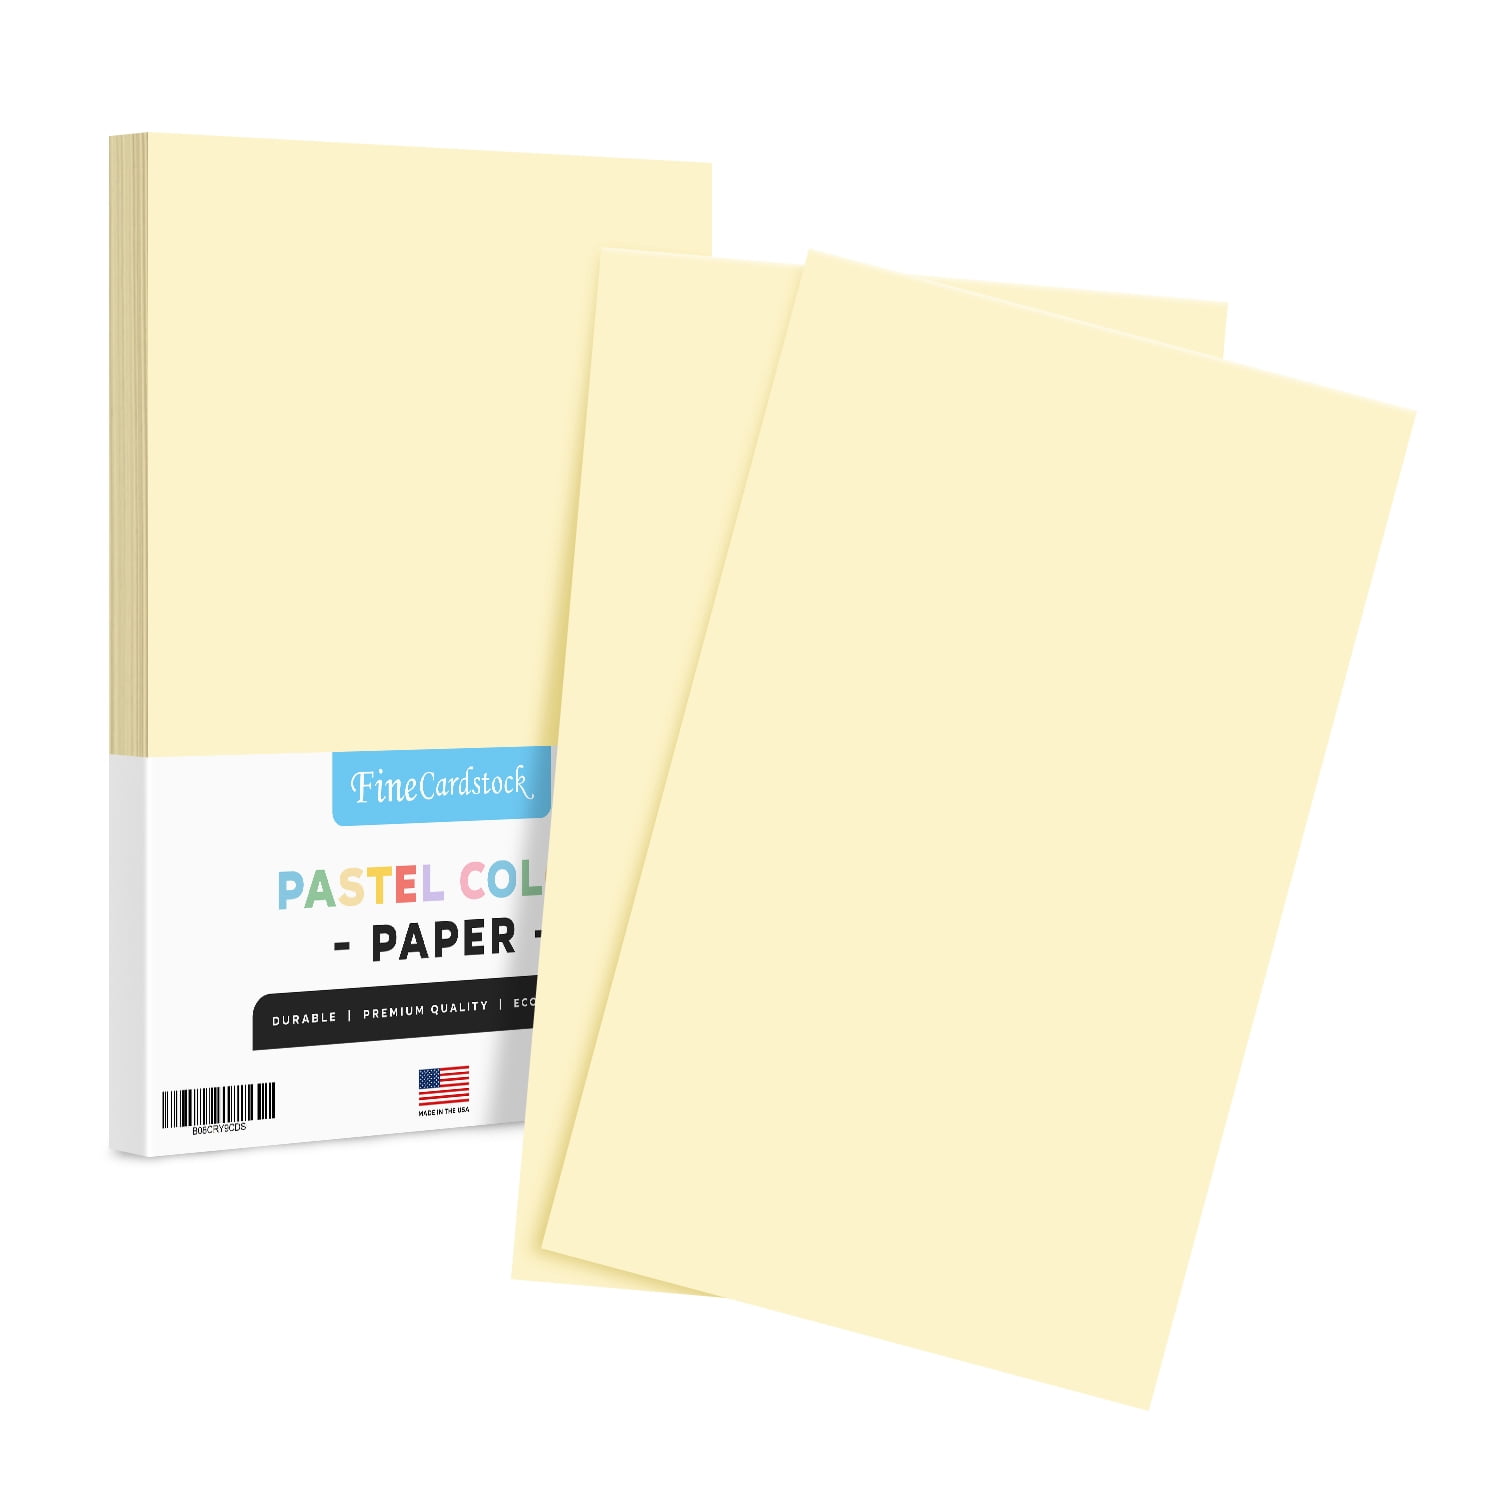 OfficeMax A4 160gsm Lovely Lavender Premium Colour Copy Paper, Pack of 250